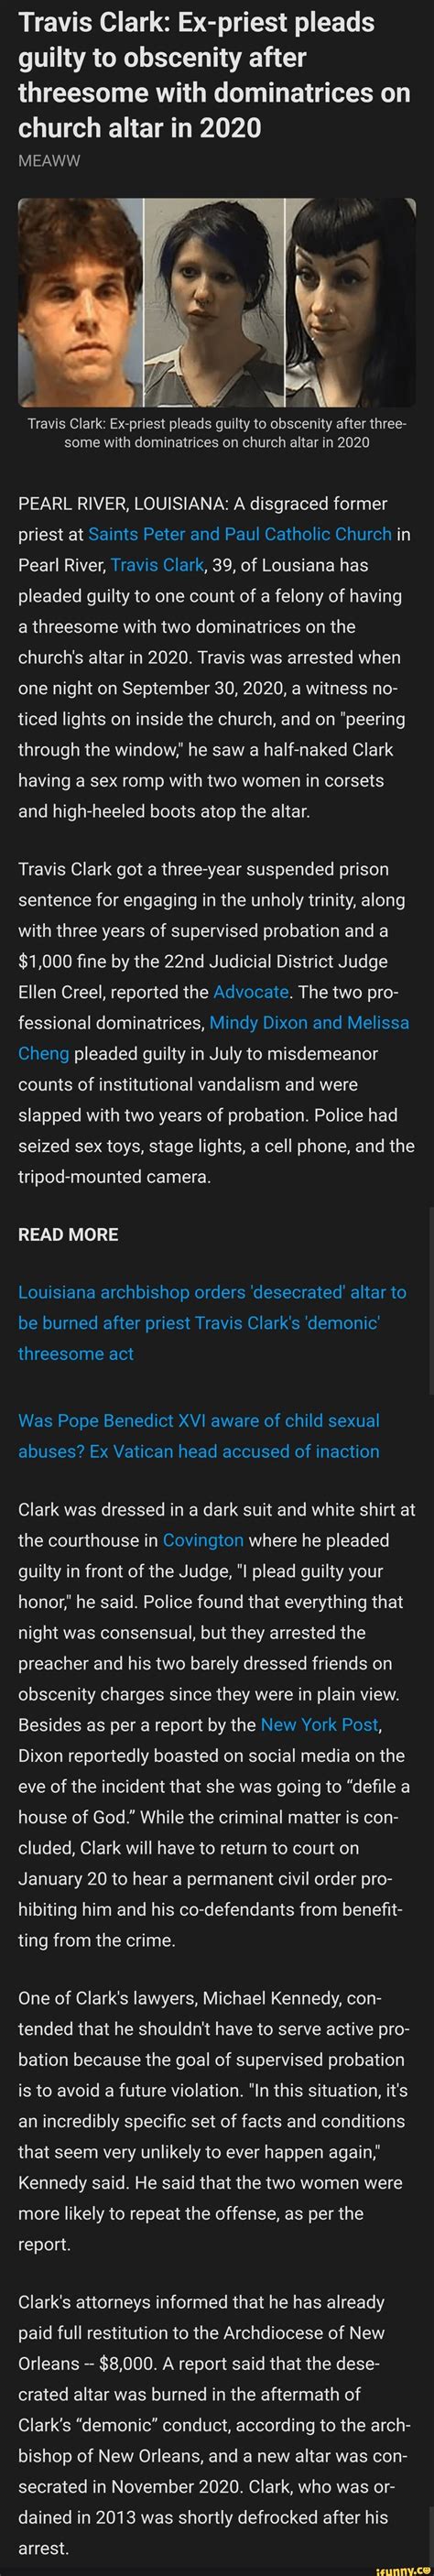 travis clark ex priest pleads guilty to obscenity after threesome with dominatrices on church